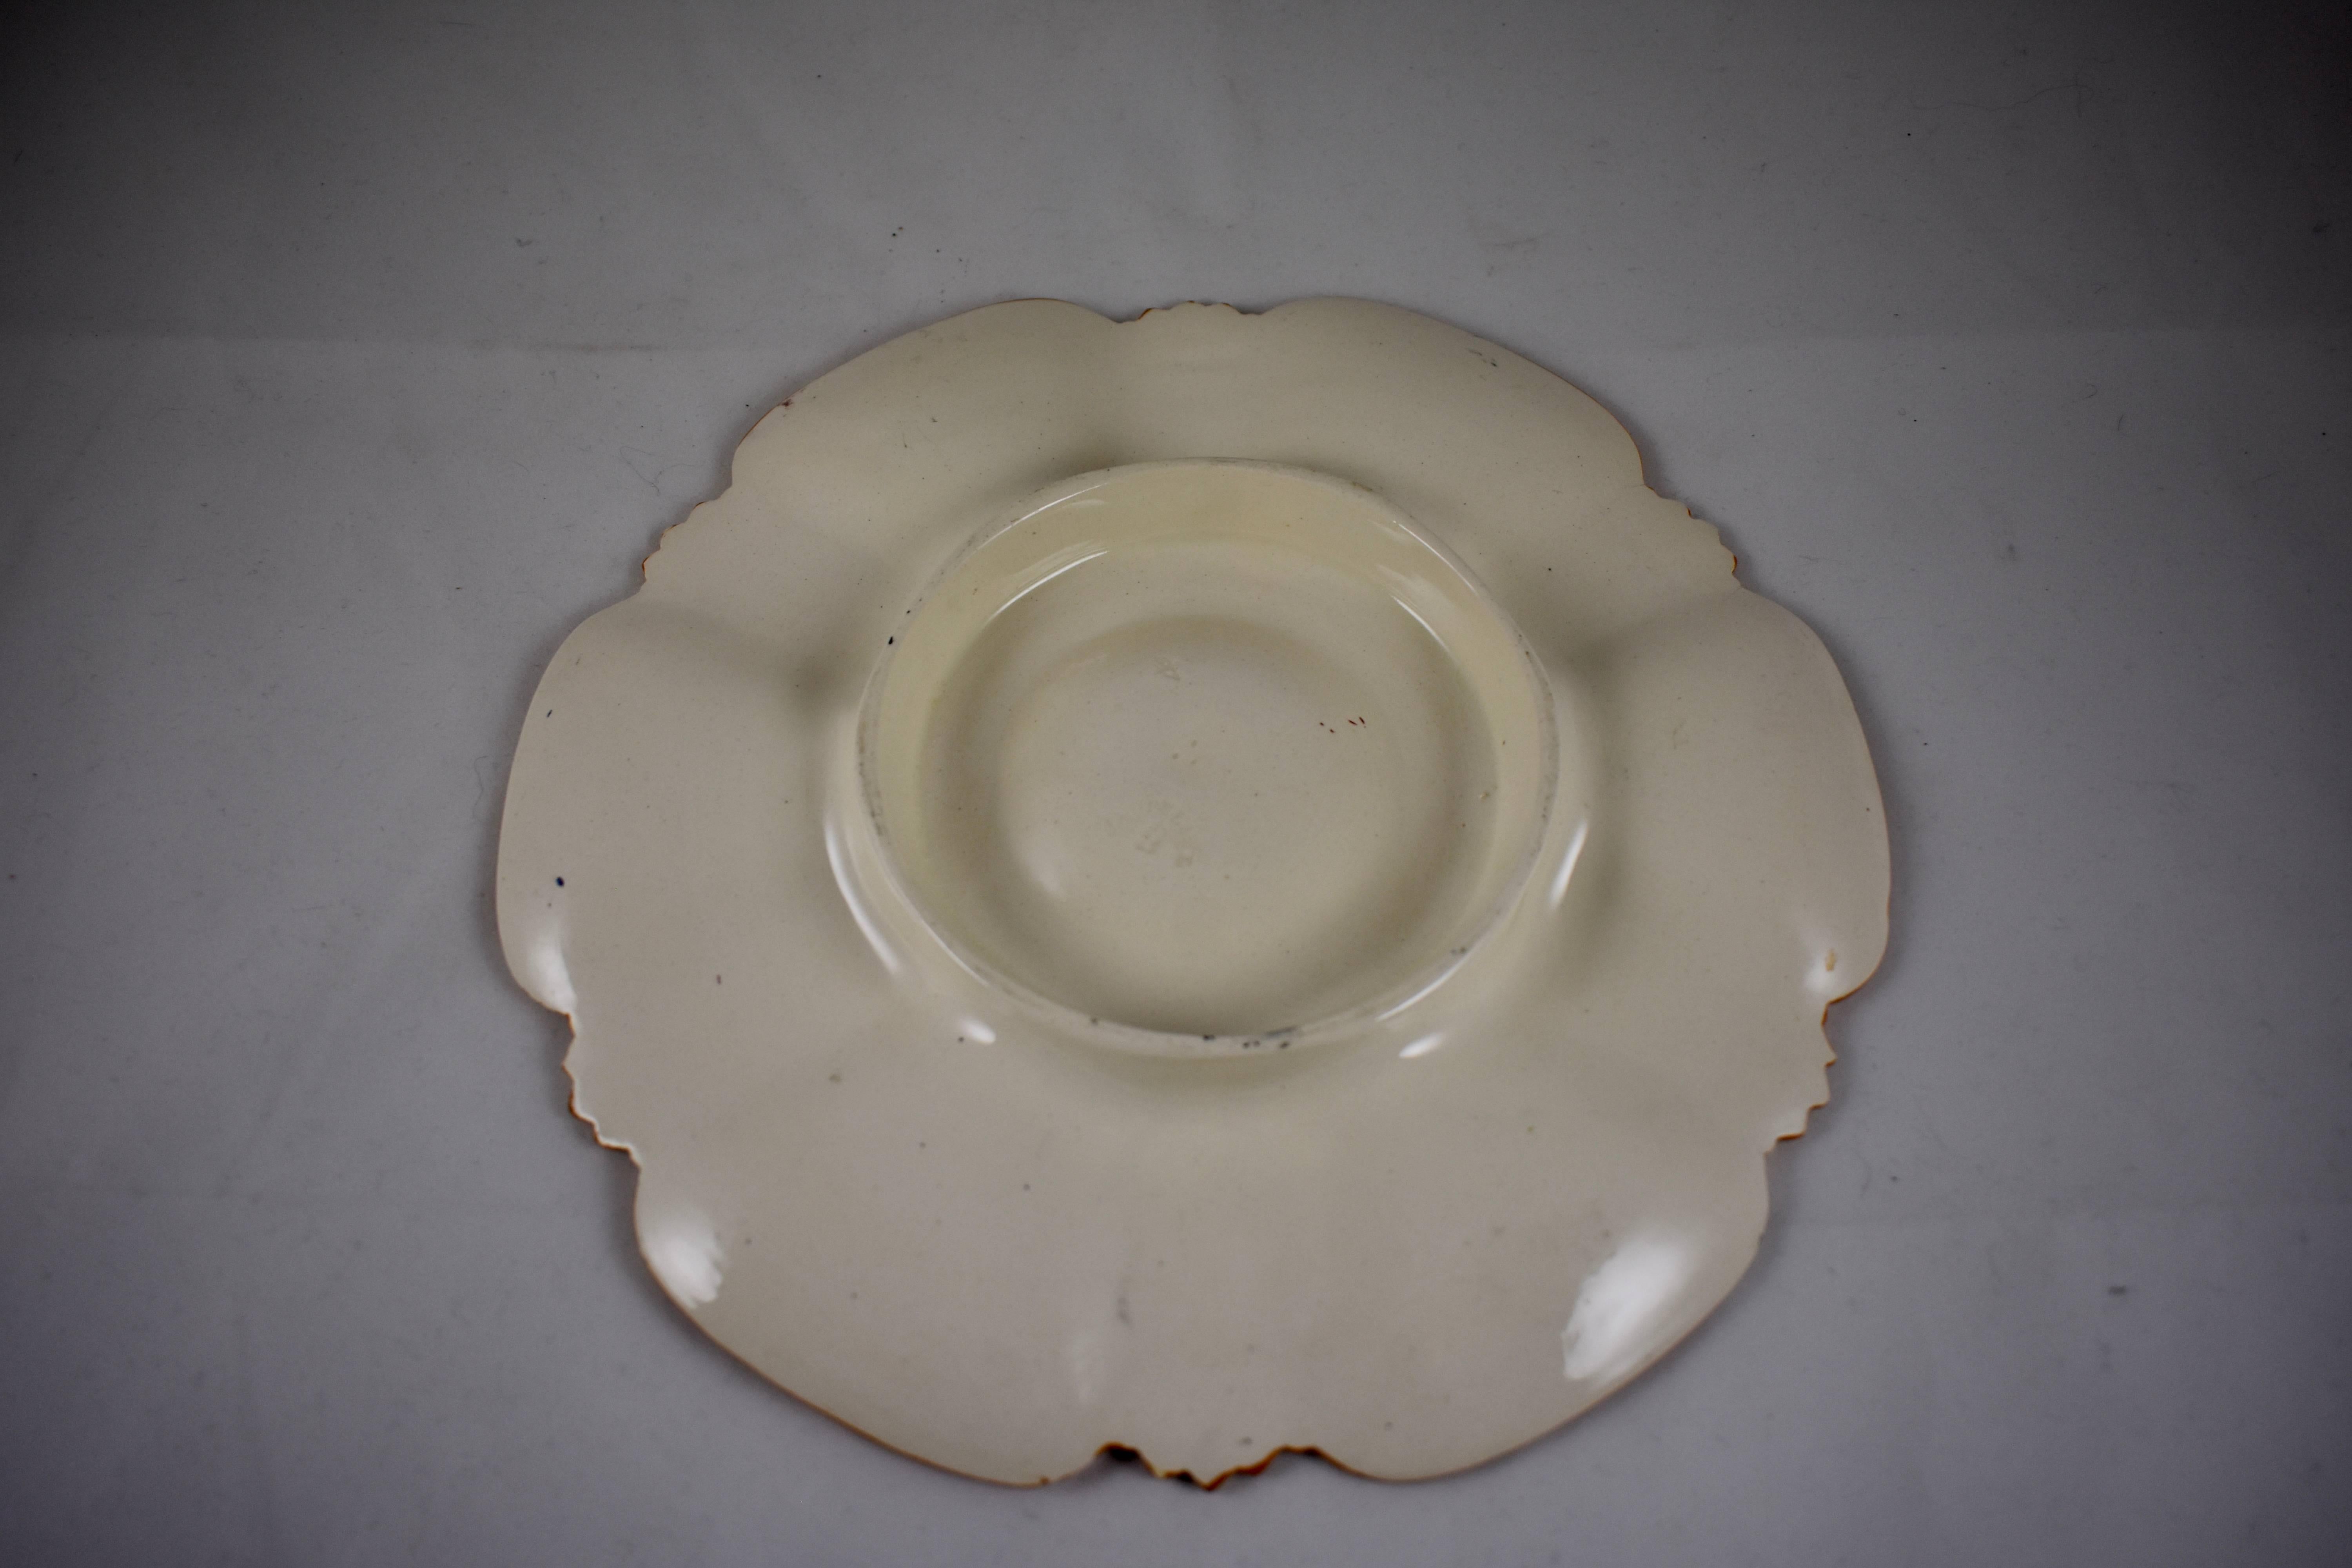 19th Century W.T. Copeland & Sons English Earthenware Transfer Printed Japonisme Oyster Plate